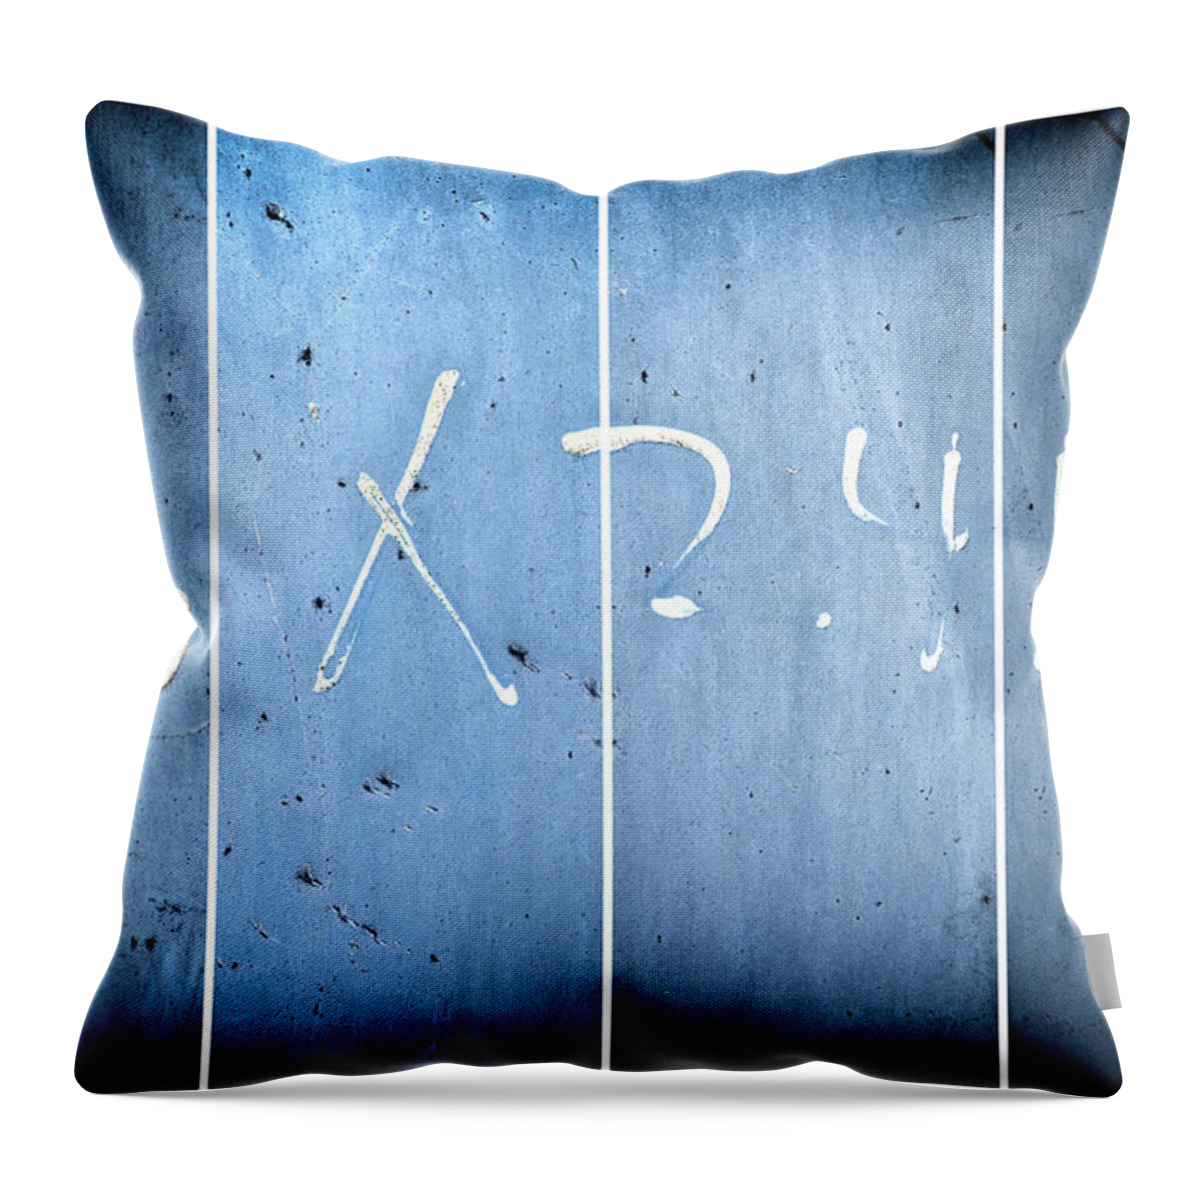 Deconstruct Throw Pillow featuring the photograph Deconstruct by Tom Druin